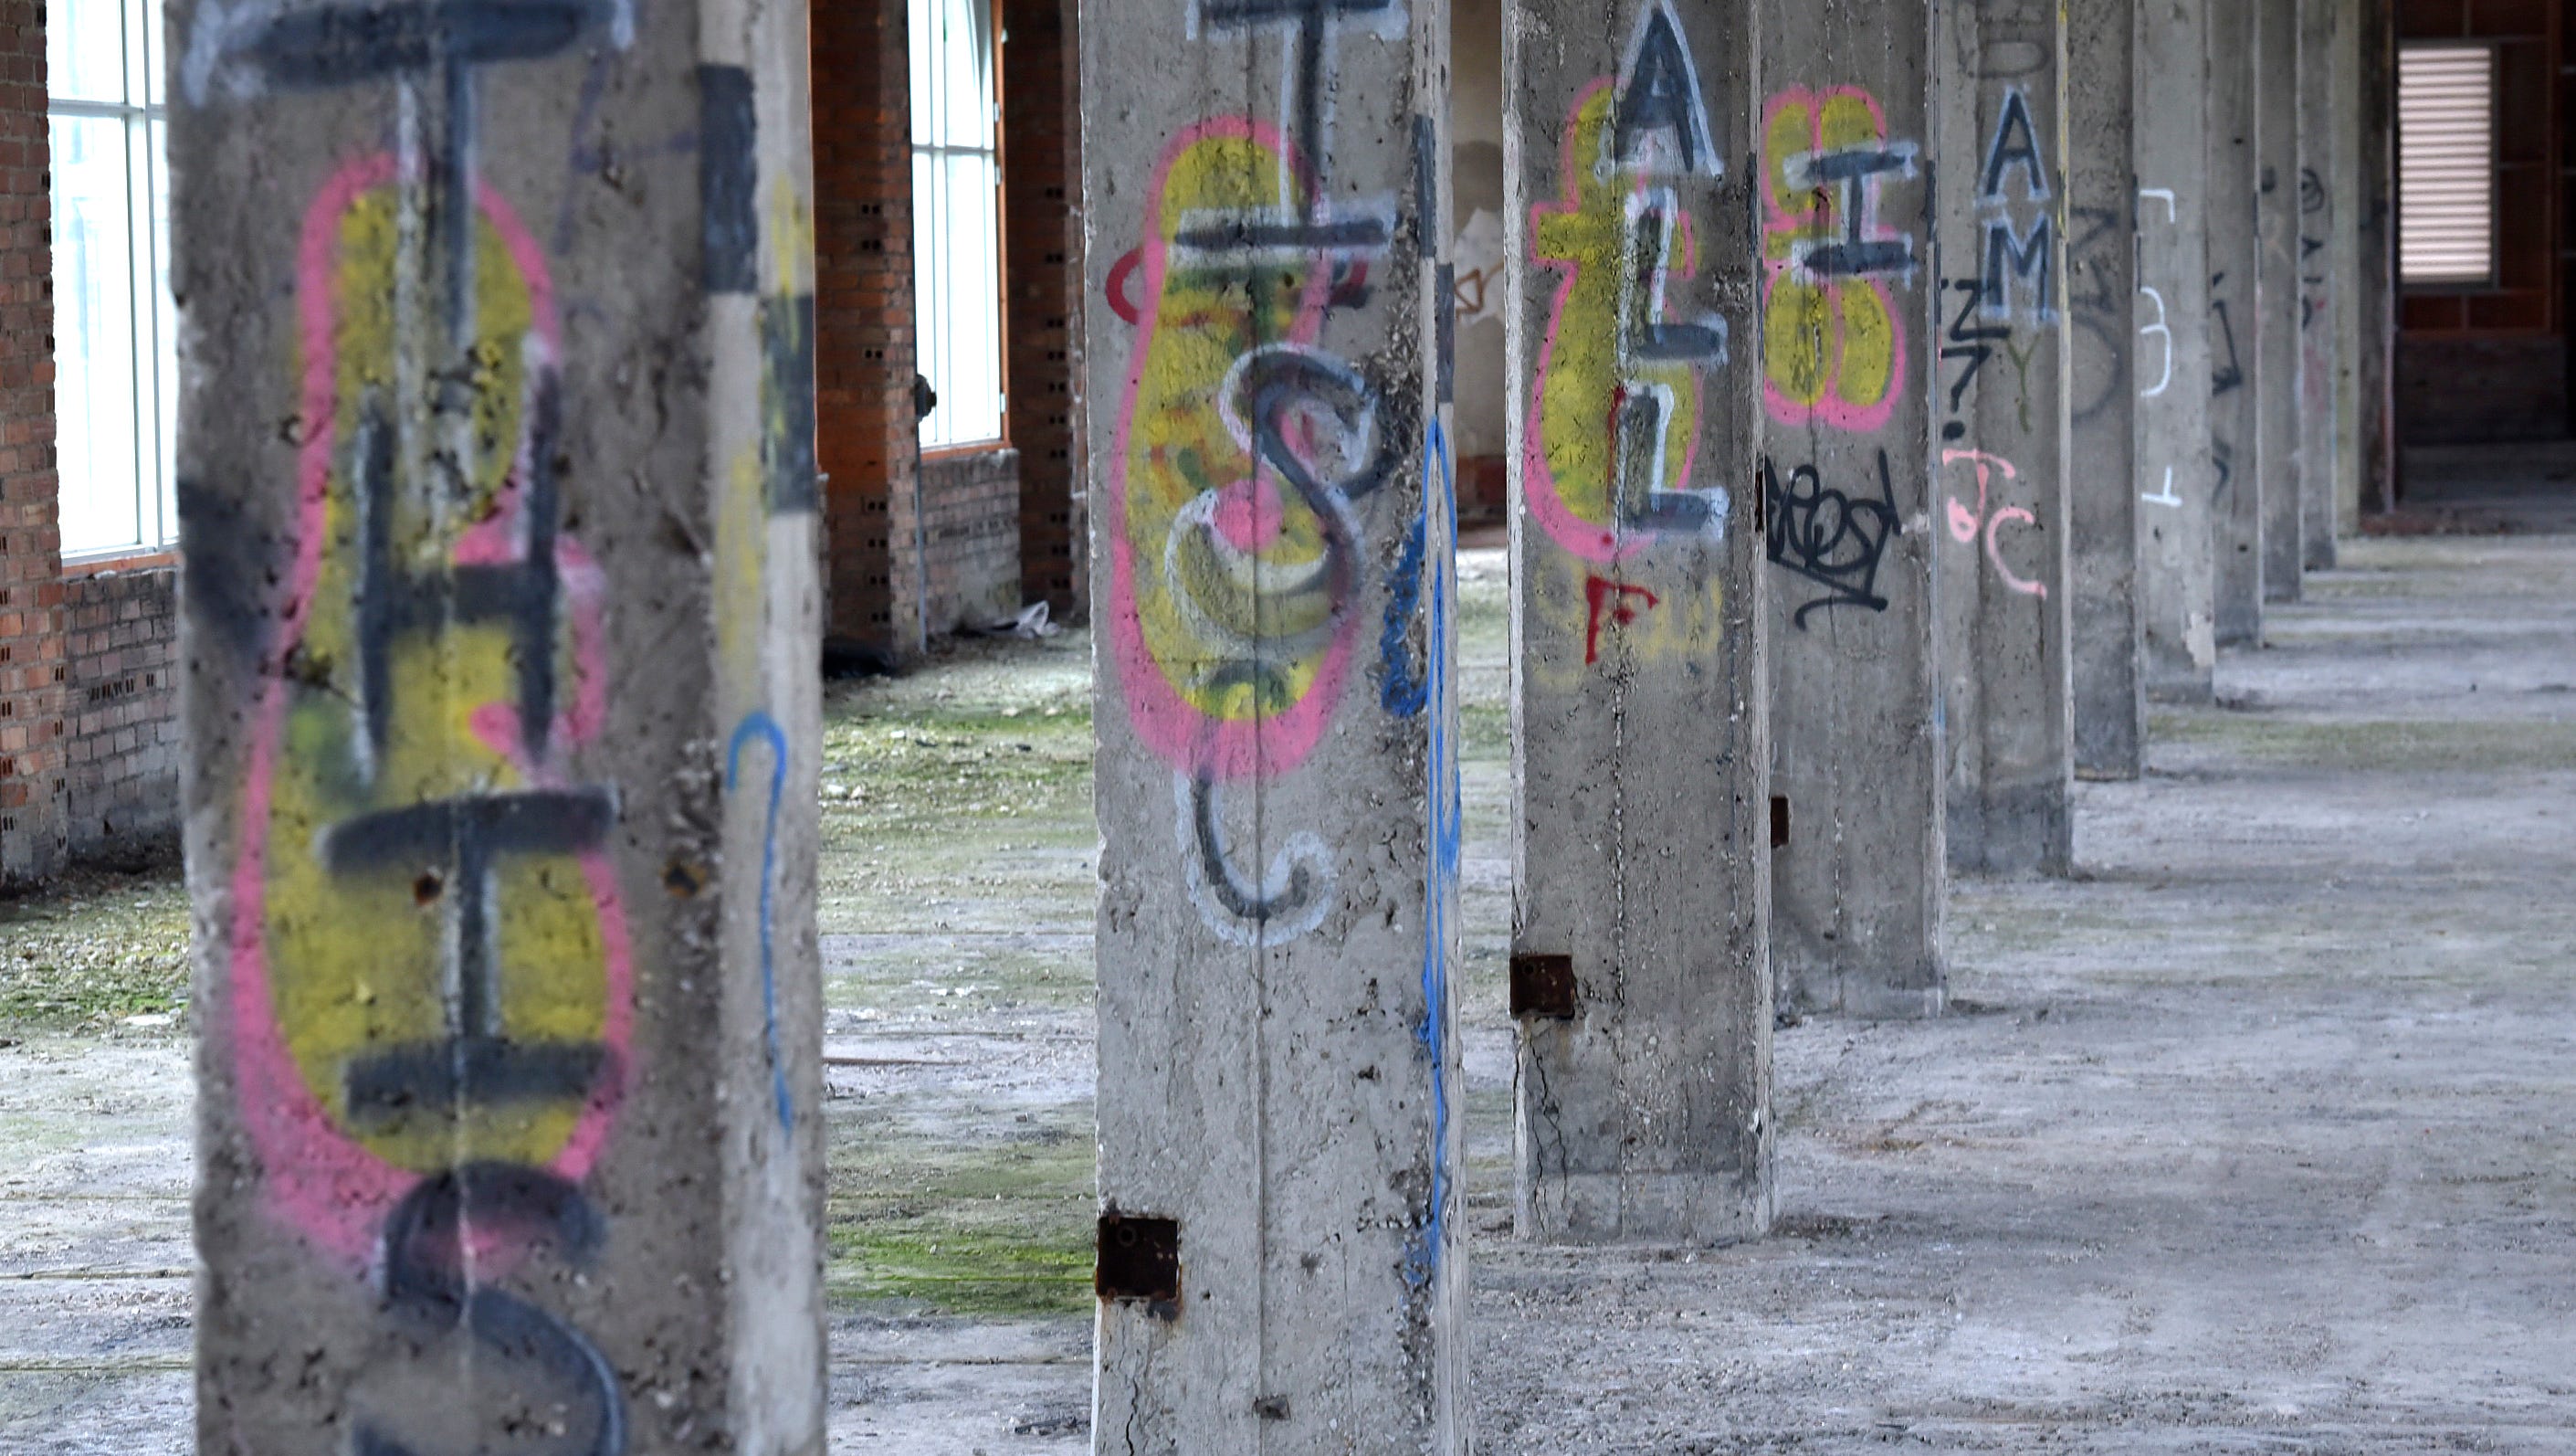 Graffiti that says, "This Is All I Am," is written on columns on the 13th floor of the train station.